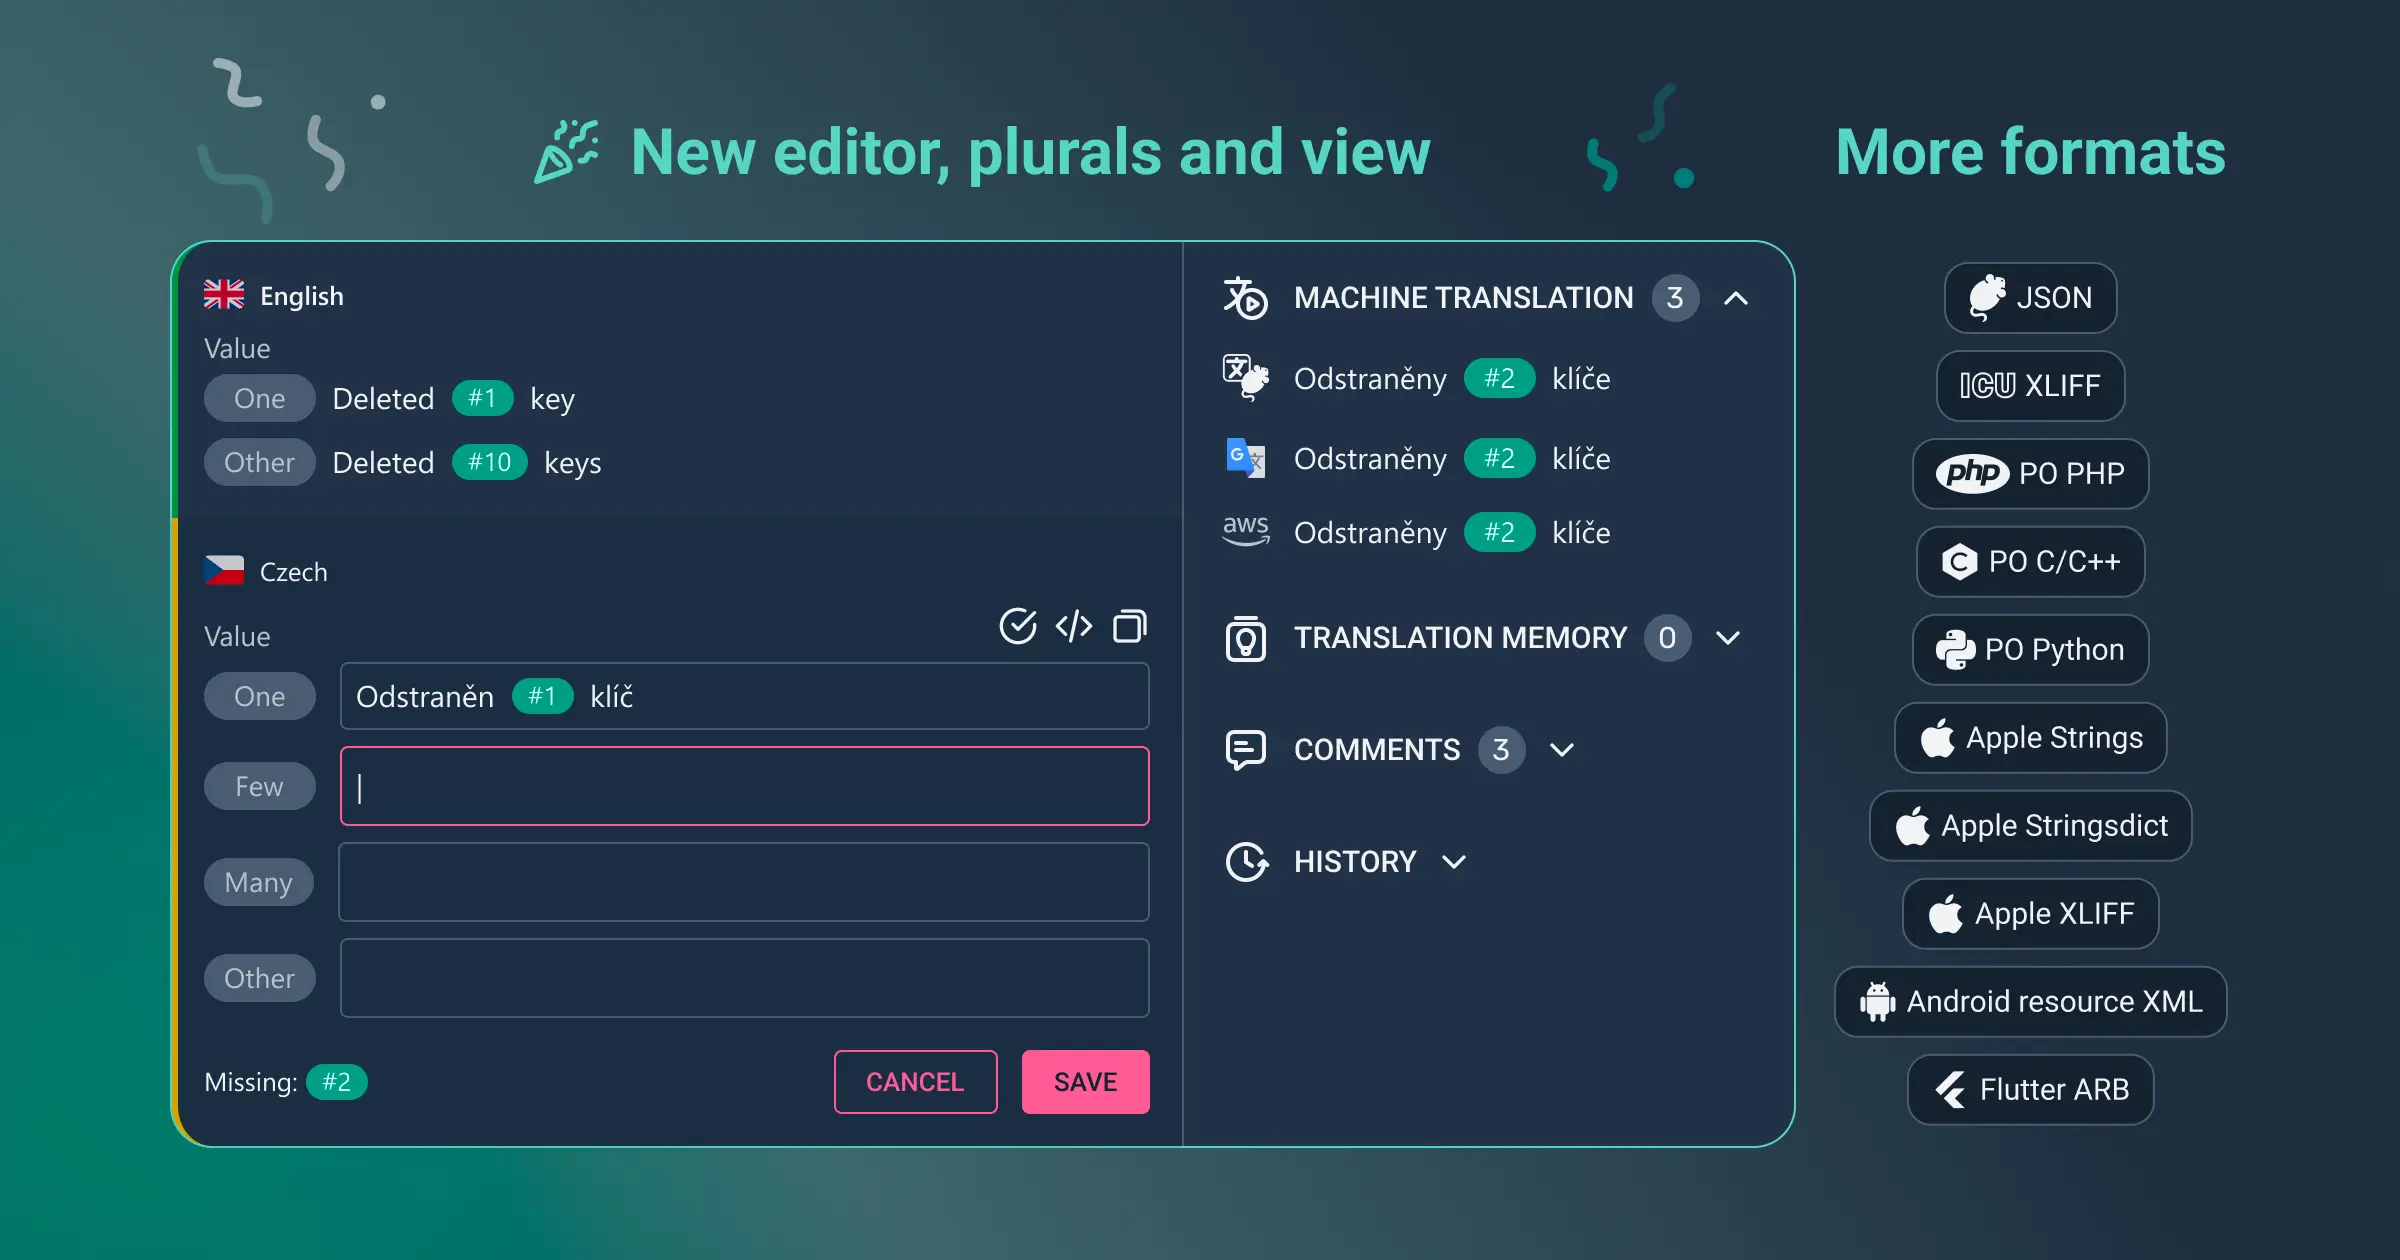 Visual editor and formats support